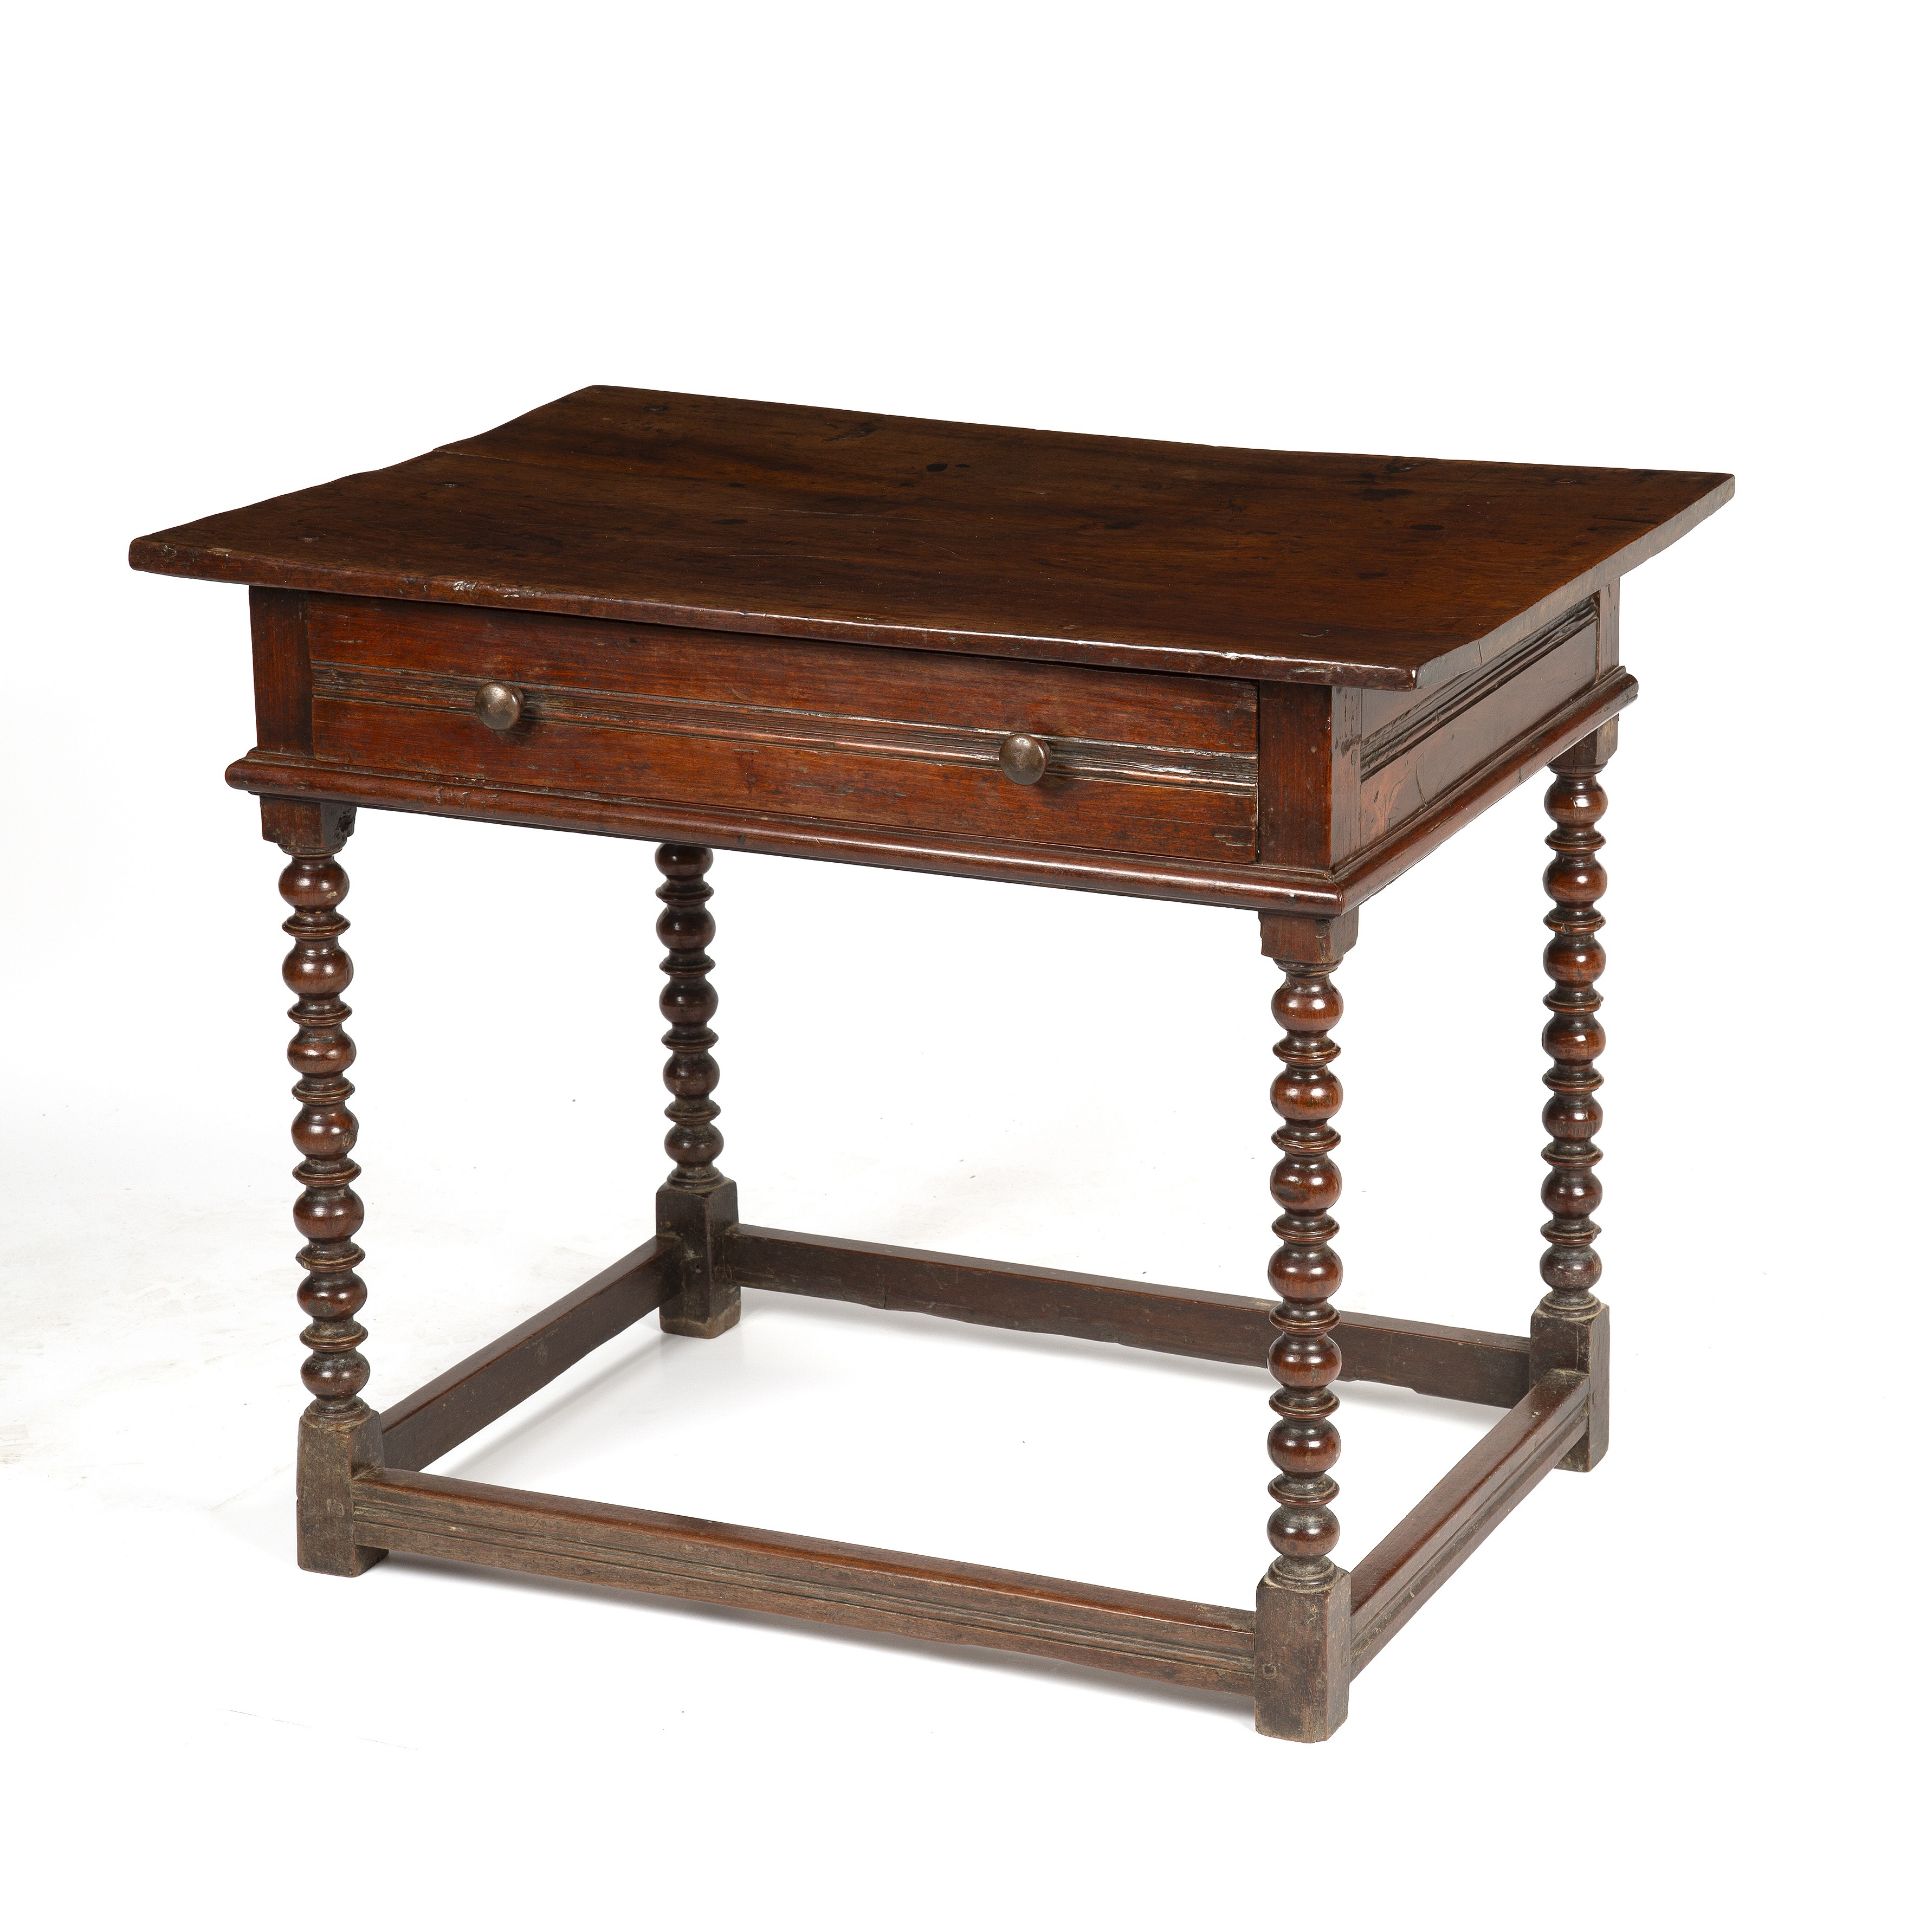 An English 17th century tropical hardwood side table with a single drawer and turned supports united - Image 4 of 6